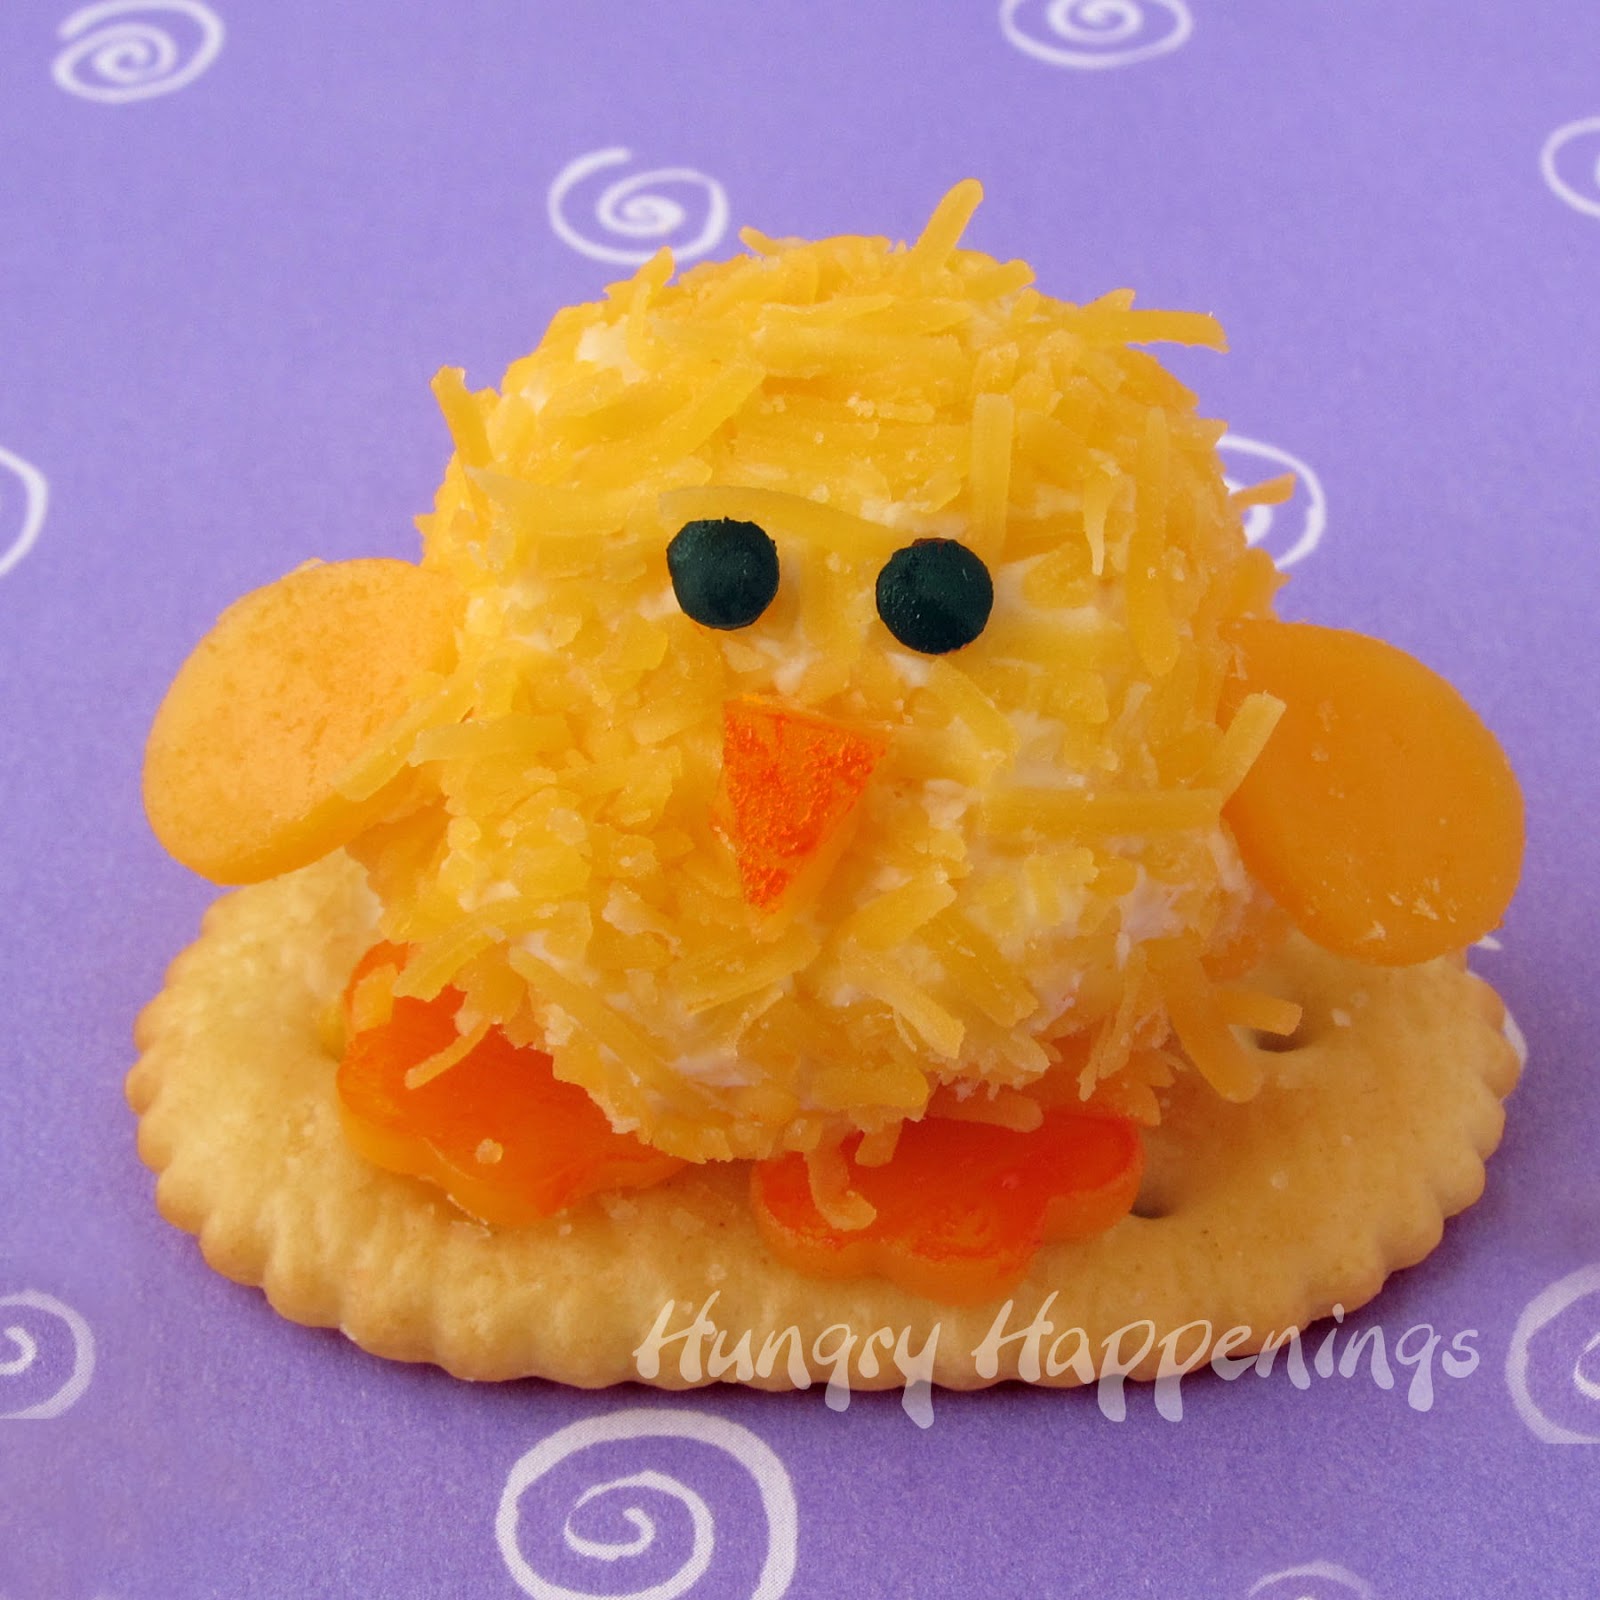 Easter Appetizers - Baby Chick Cheese Balls are so CUTE!